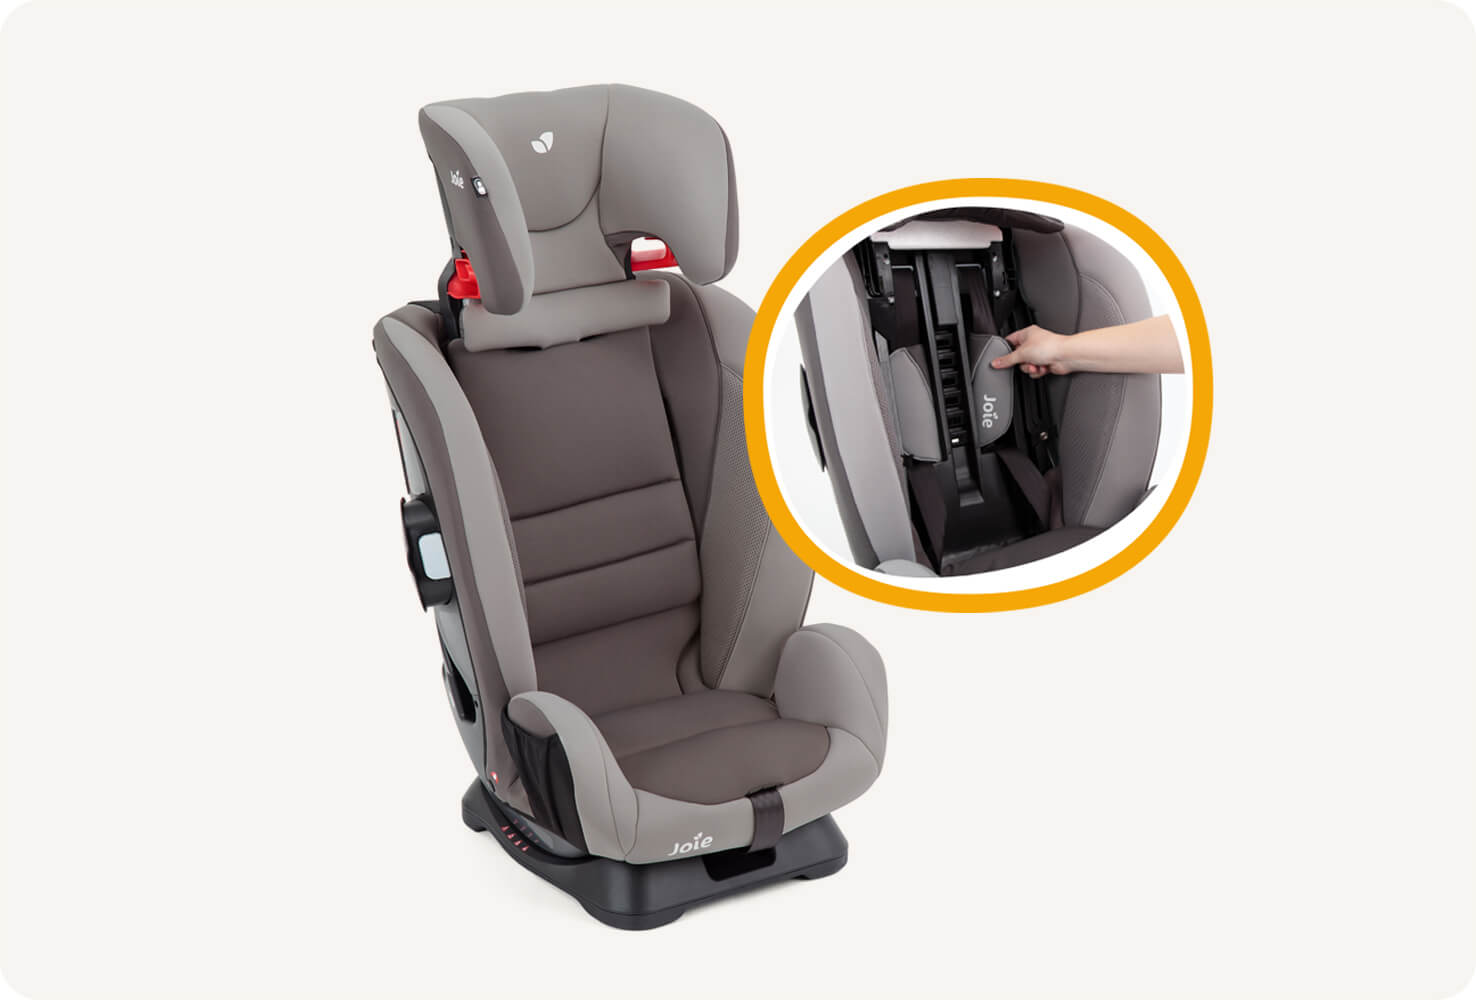 Right angle view of fortifi child car seat with an inset picture showing the harness storage behind the seat’s cover.